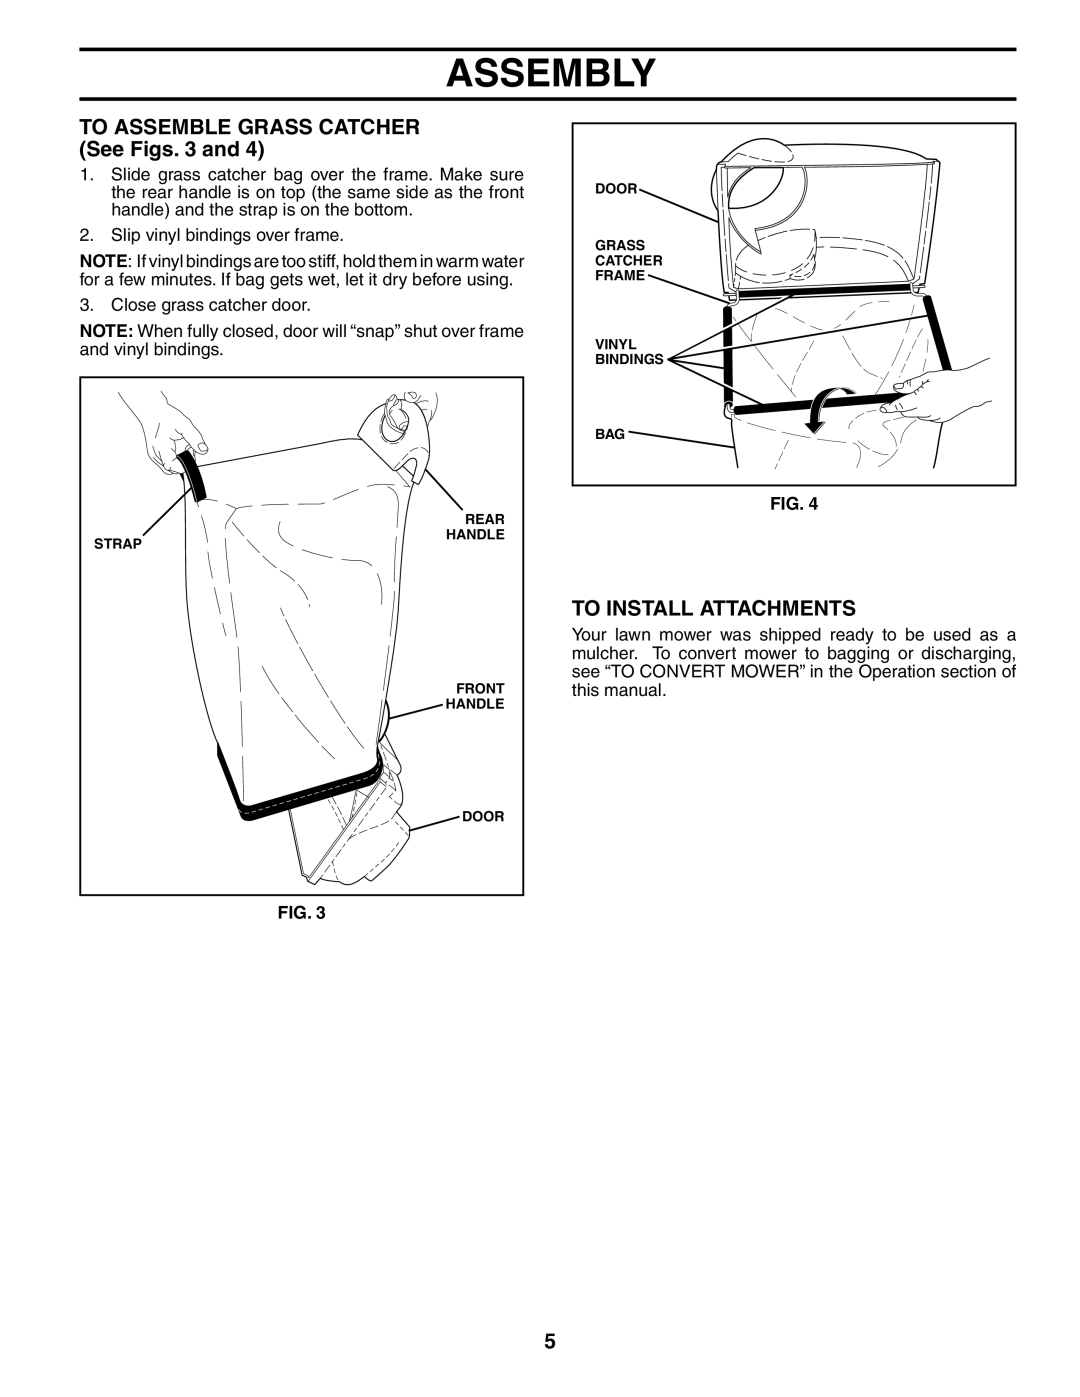 Husqvarna 55R21HVL owner manual TO ASSEMBLE GRASS CATCHER See Figs. 3 and, To Install Attachments, Assembly 